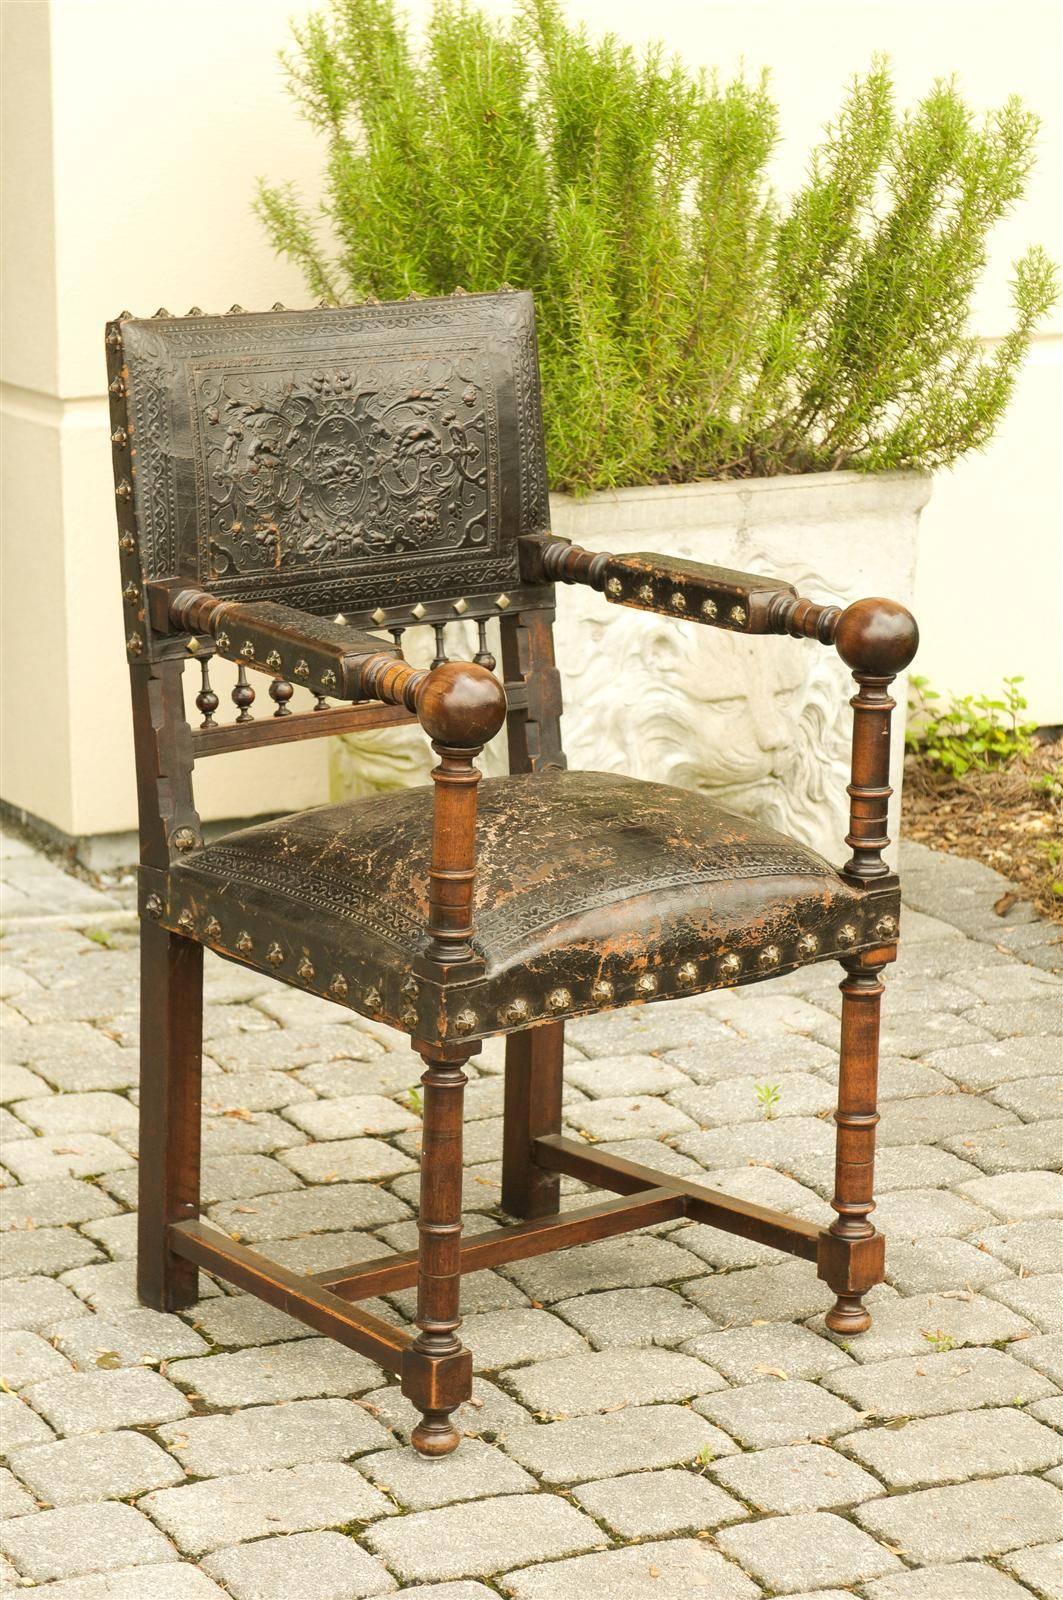 A French wooden armchair with leather upholstery from the turn of the century (19th-20th). This French wooden chair from circa 1890-1910 features an exquisite original black leather embossed back and seat, as well as partially upholstered open arms.